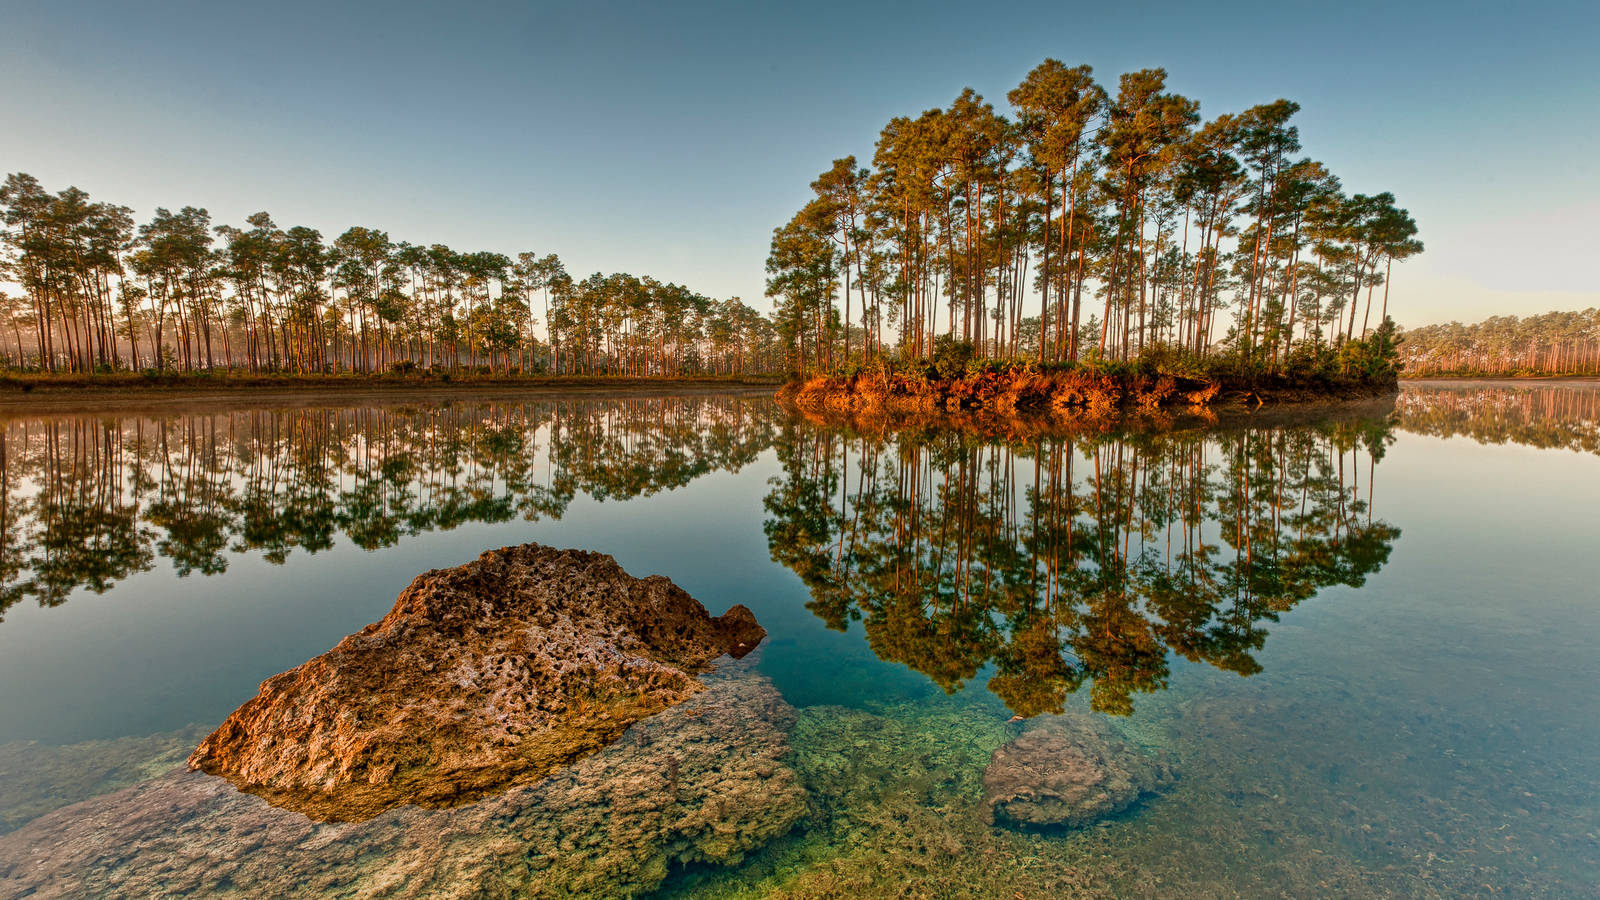 Restoration Strategies for Clean Water for the Everglades